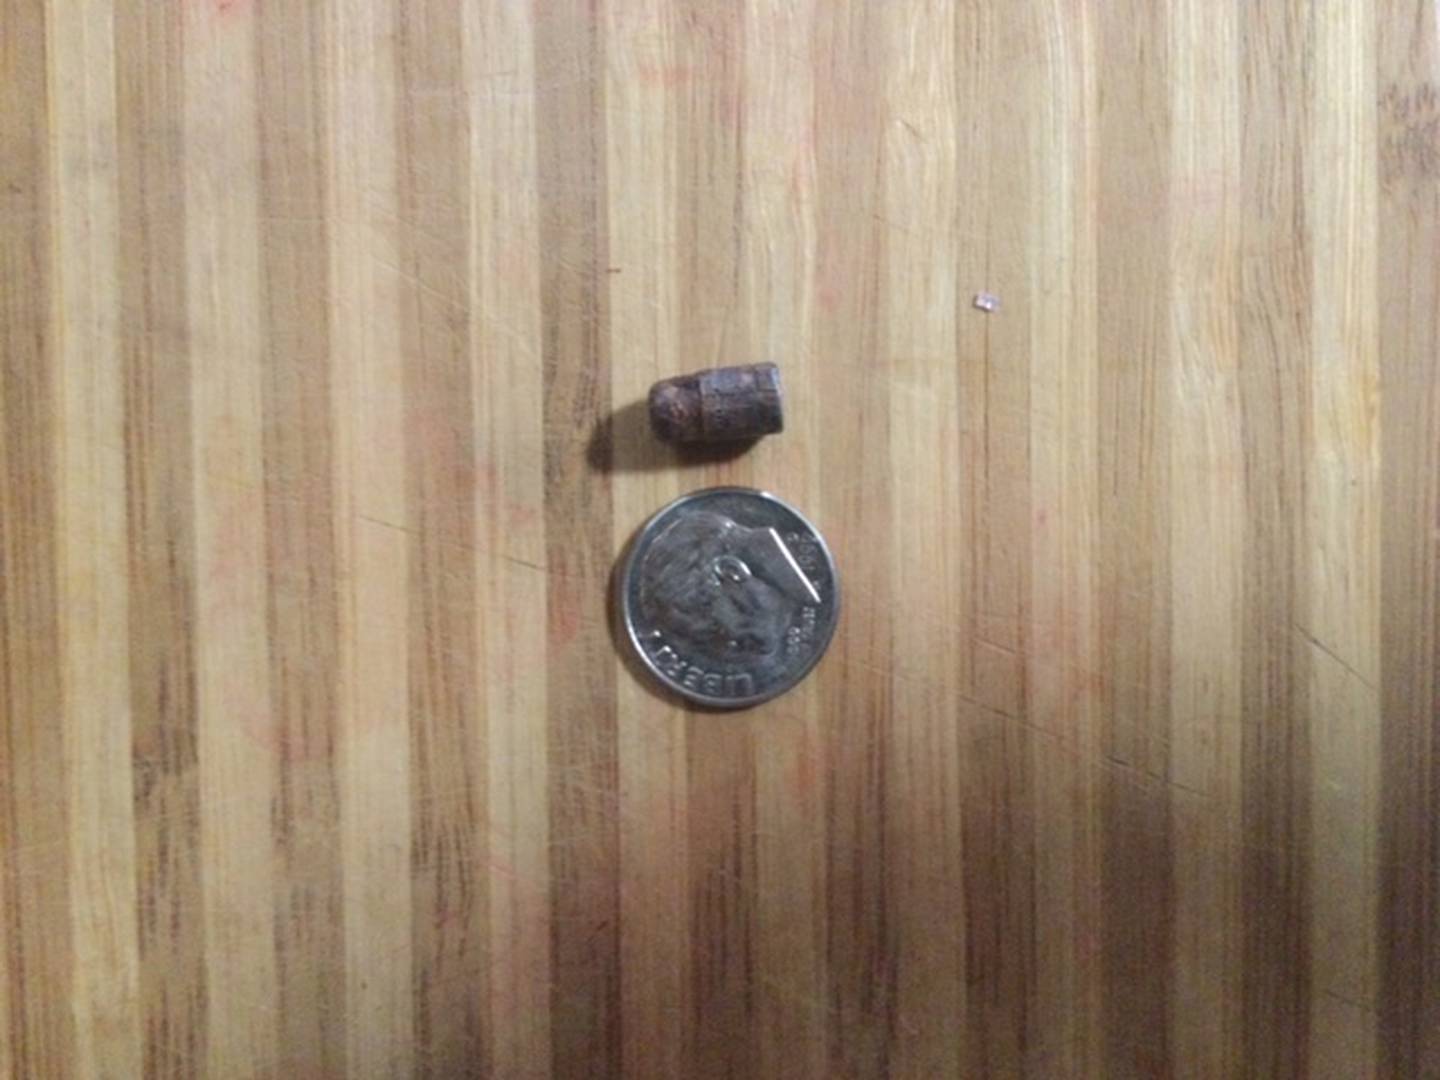 A .22 bullet that was taken from a moose